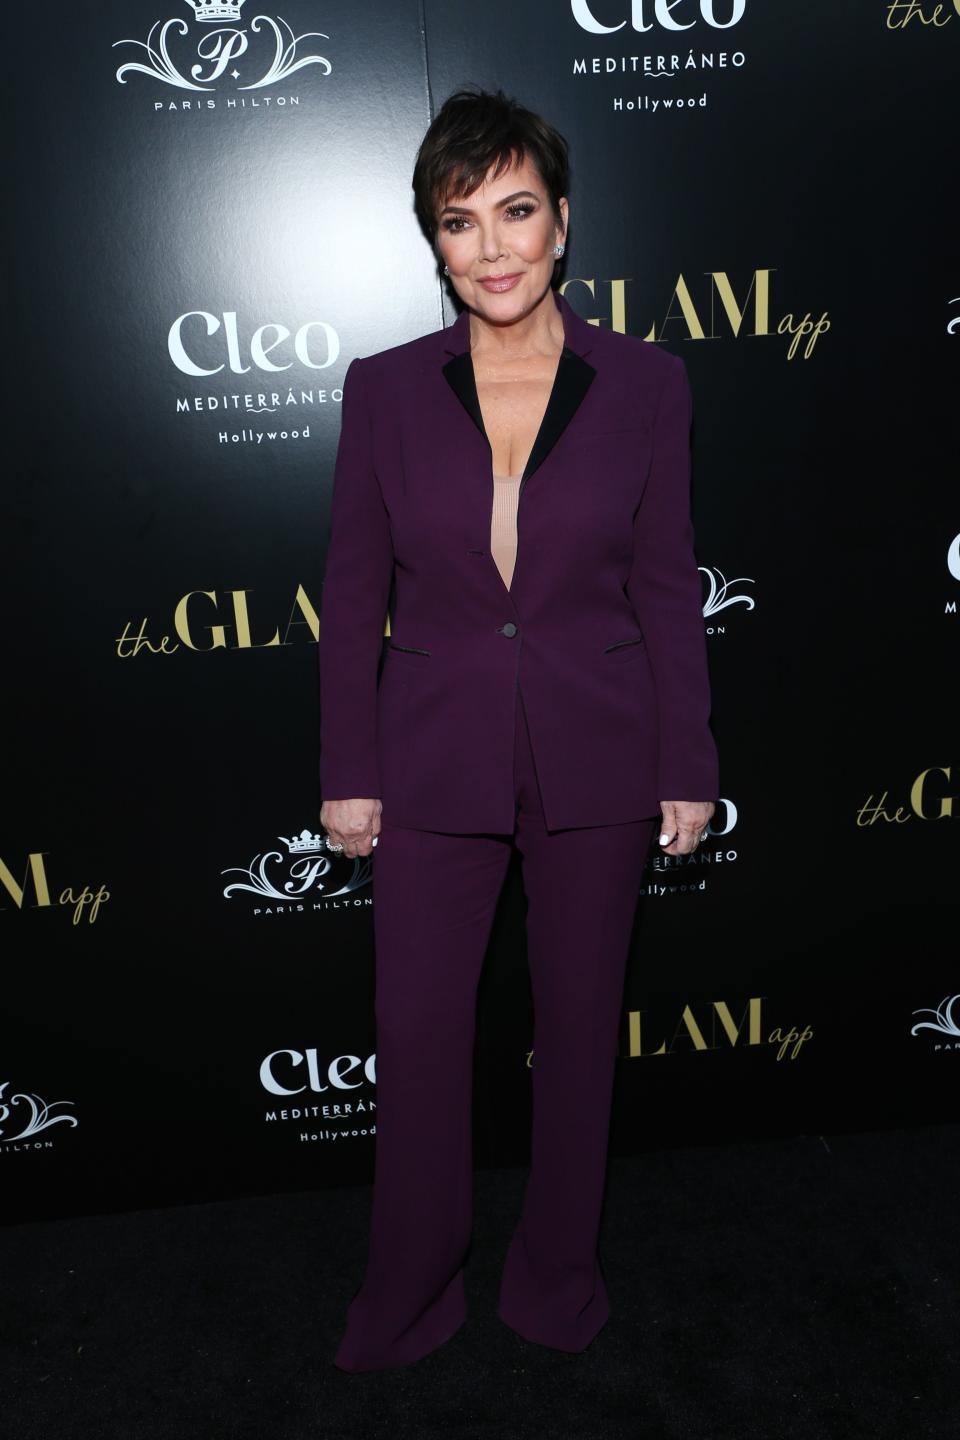 Kris Jenner looks breath-taking in a fashionable purple suit with her stylish low-cut hair.